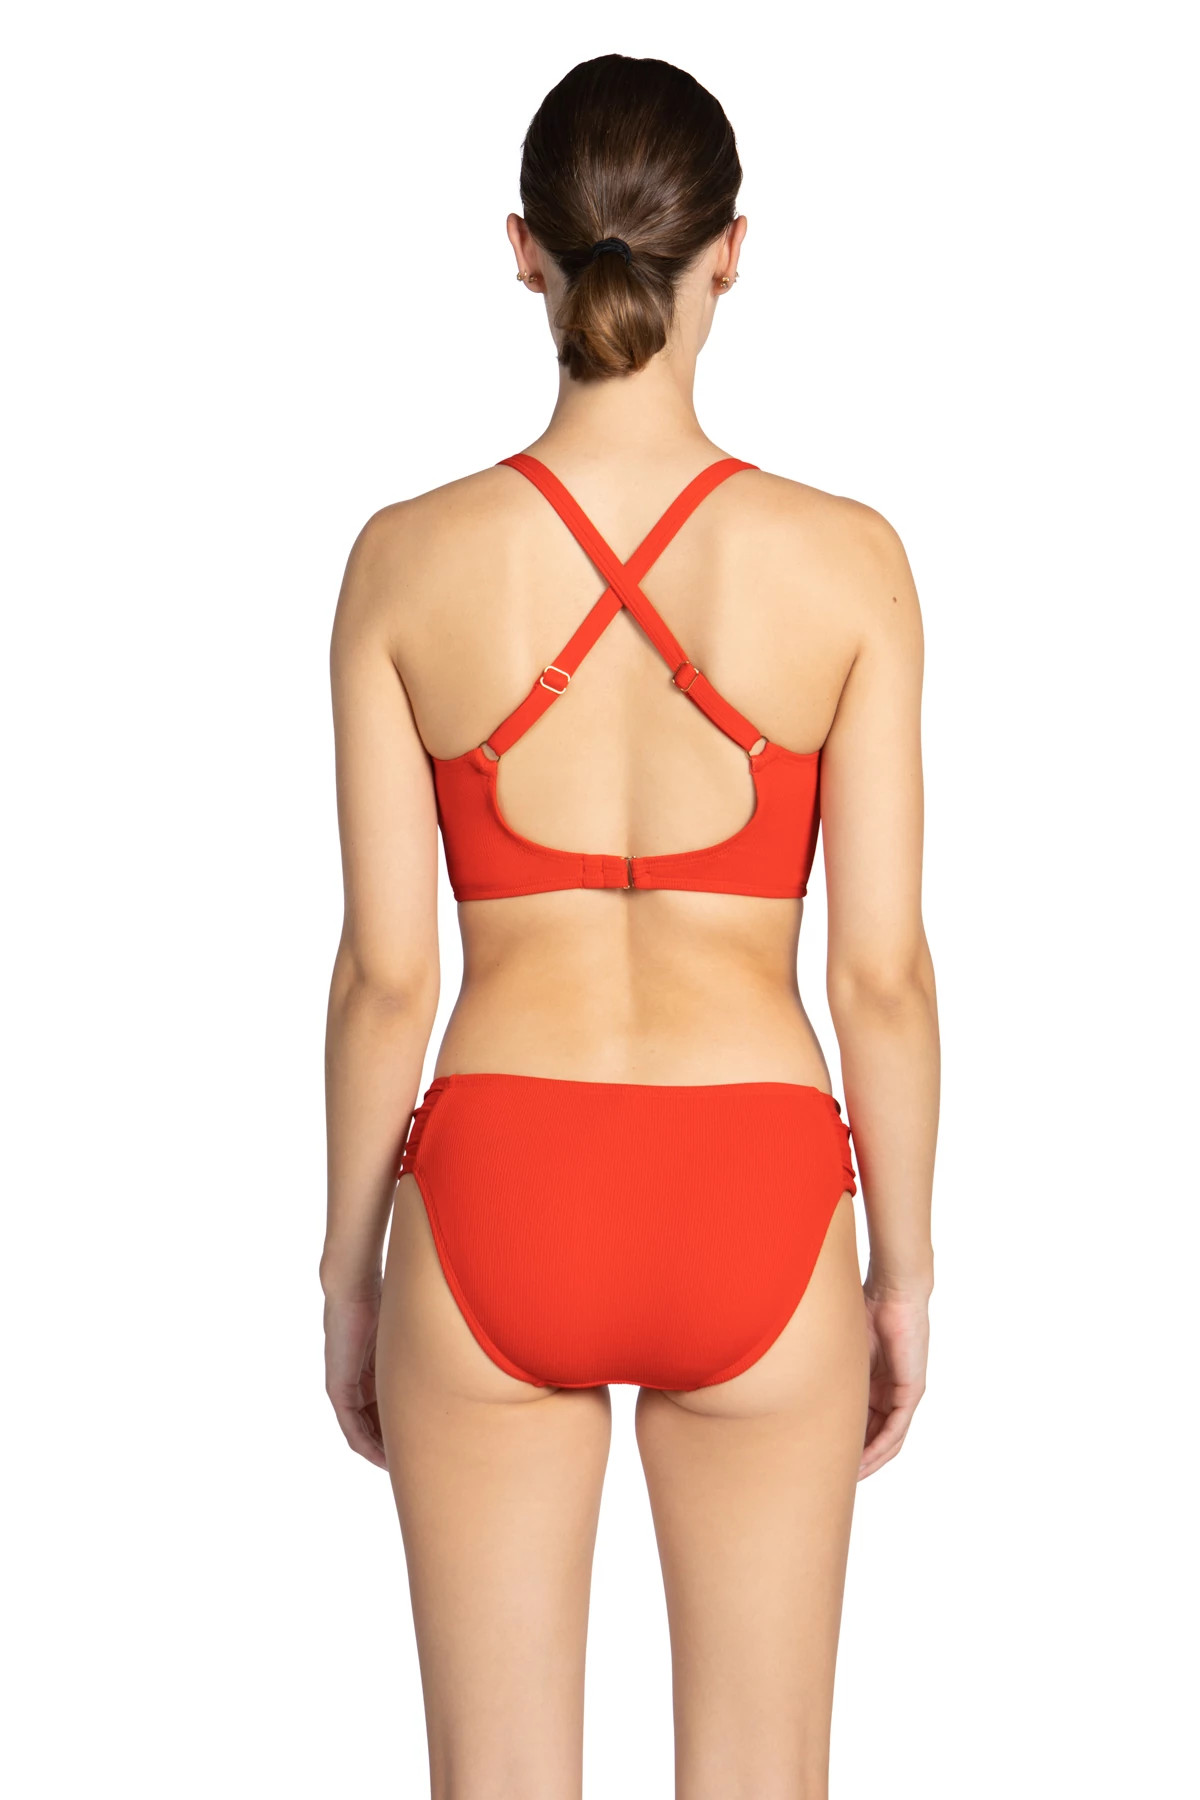 MARMALADE Amy Banded Triangle Bikini Top (D Cup) image number 2